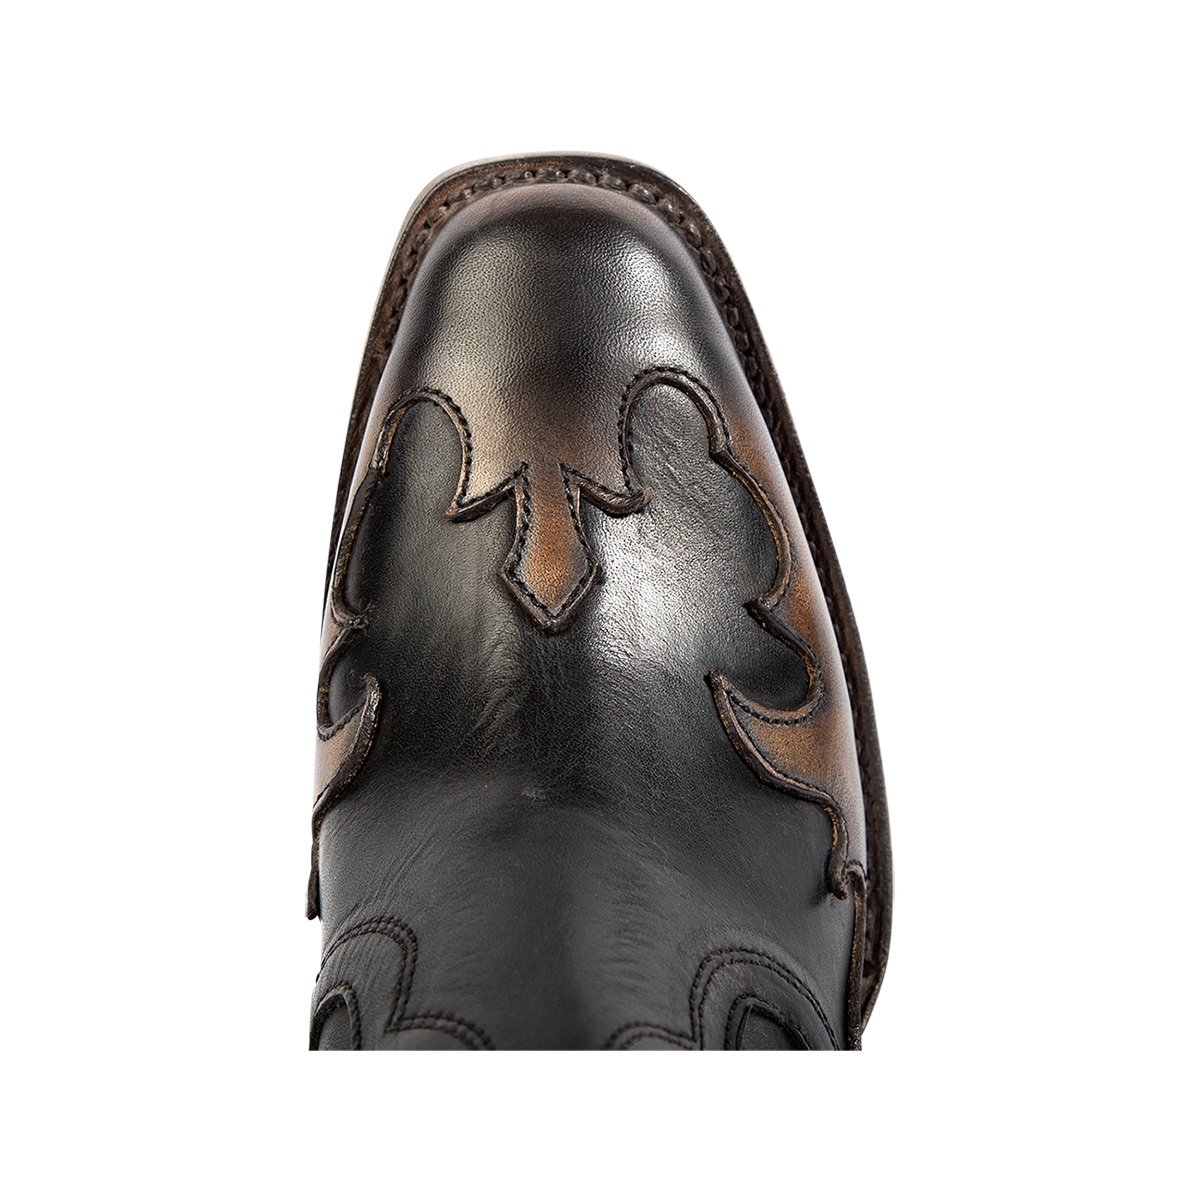 Top view showing a contrasting leather overlay design and 100% full grain leather on FREEBIRD women's Paula beige multi women's leather bootie